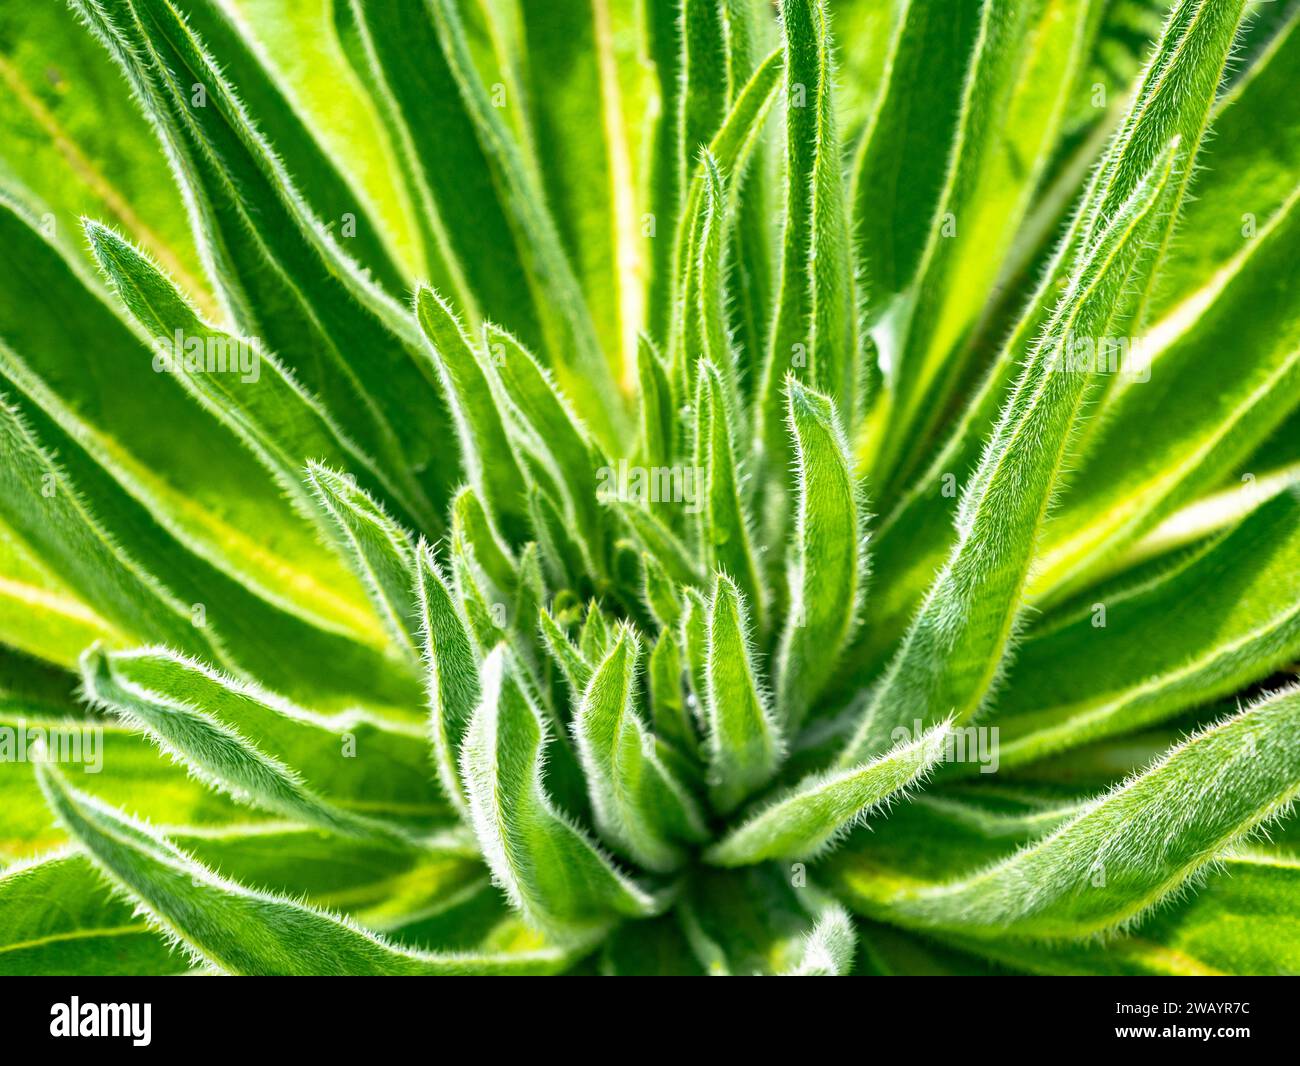 Green plant abstract background Stock Photo